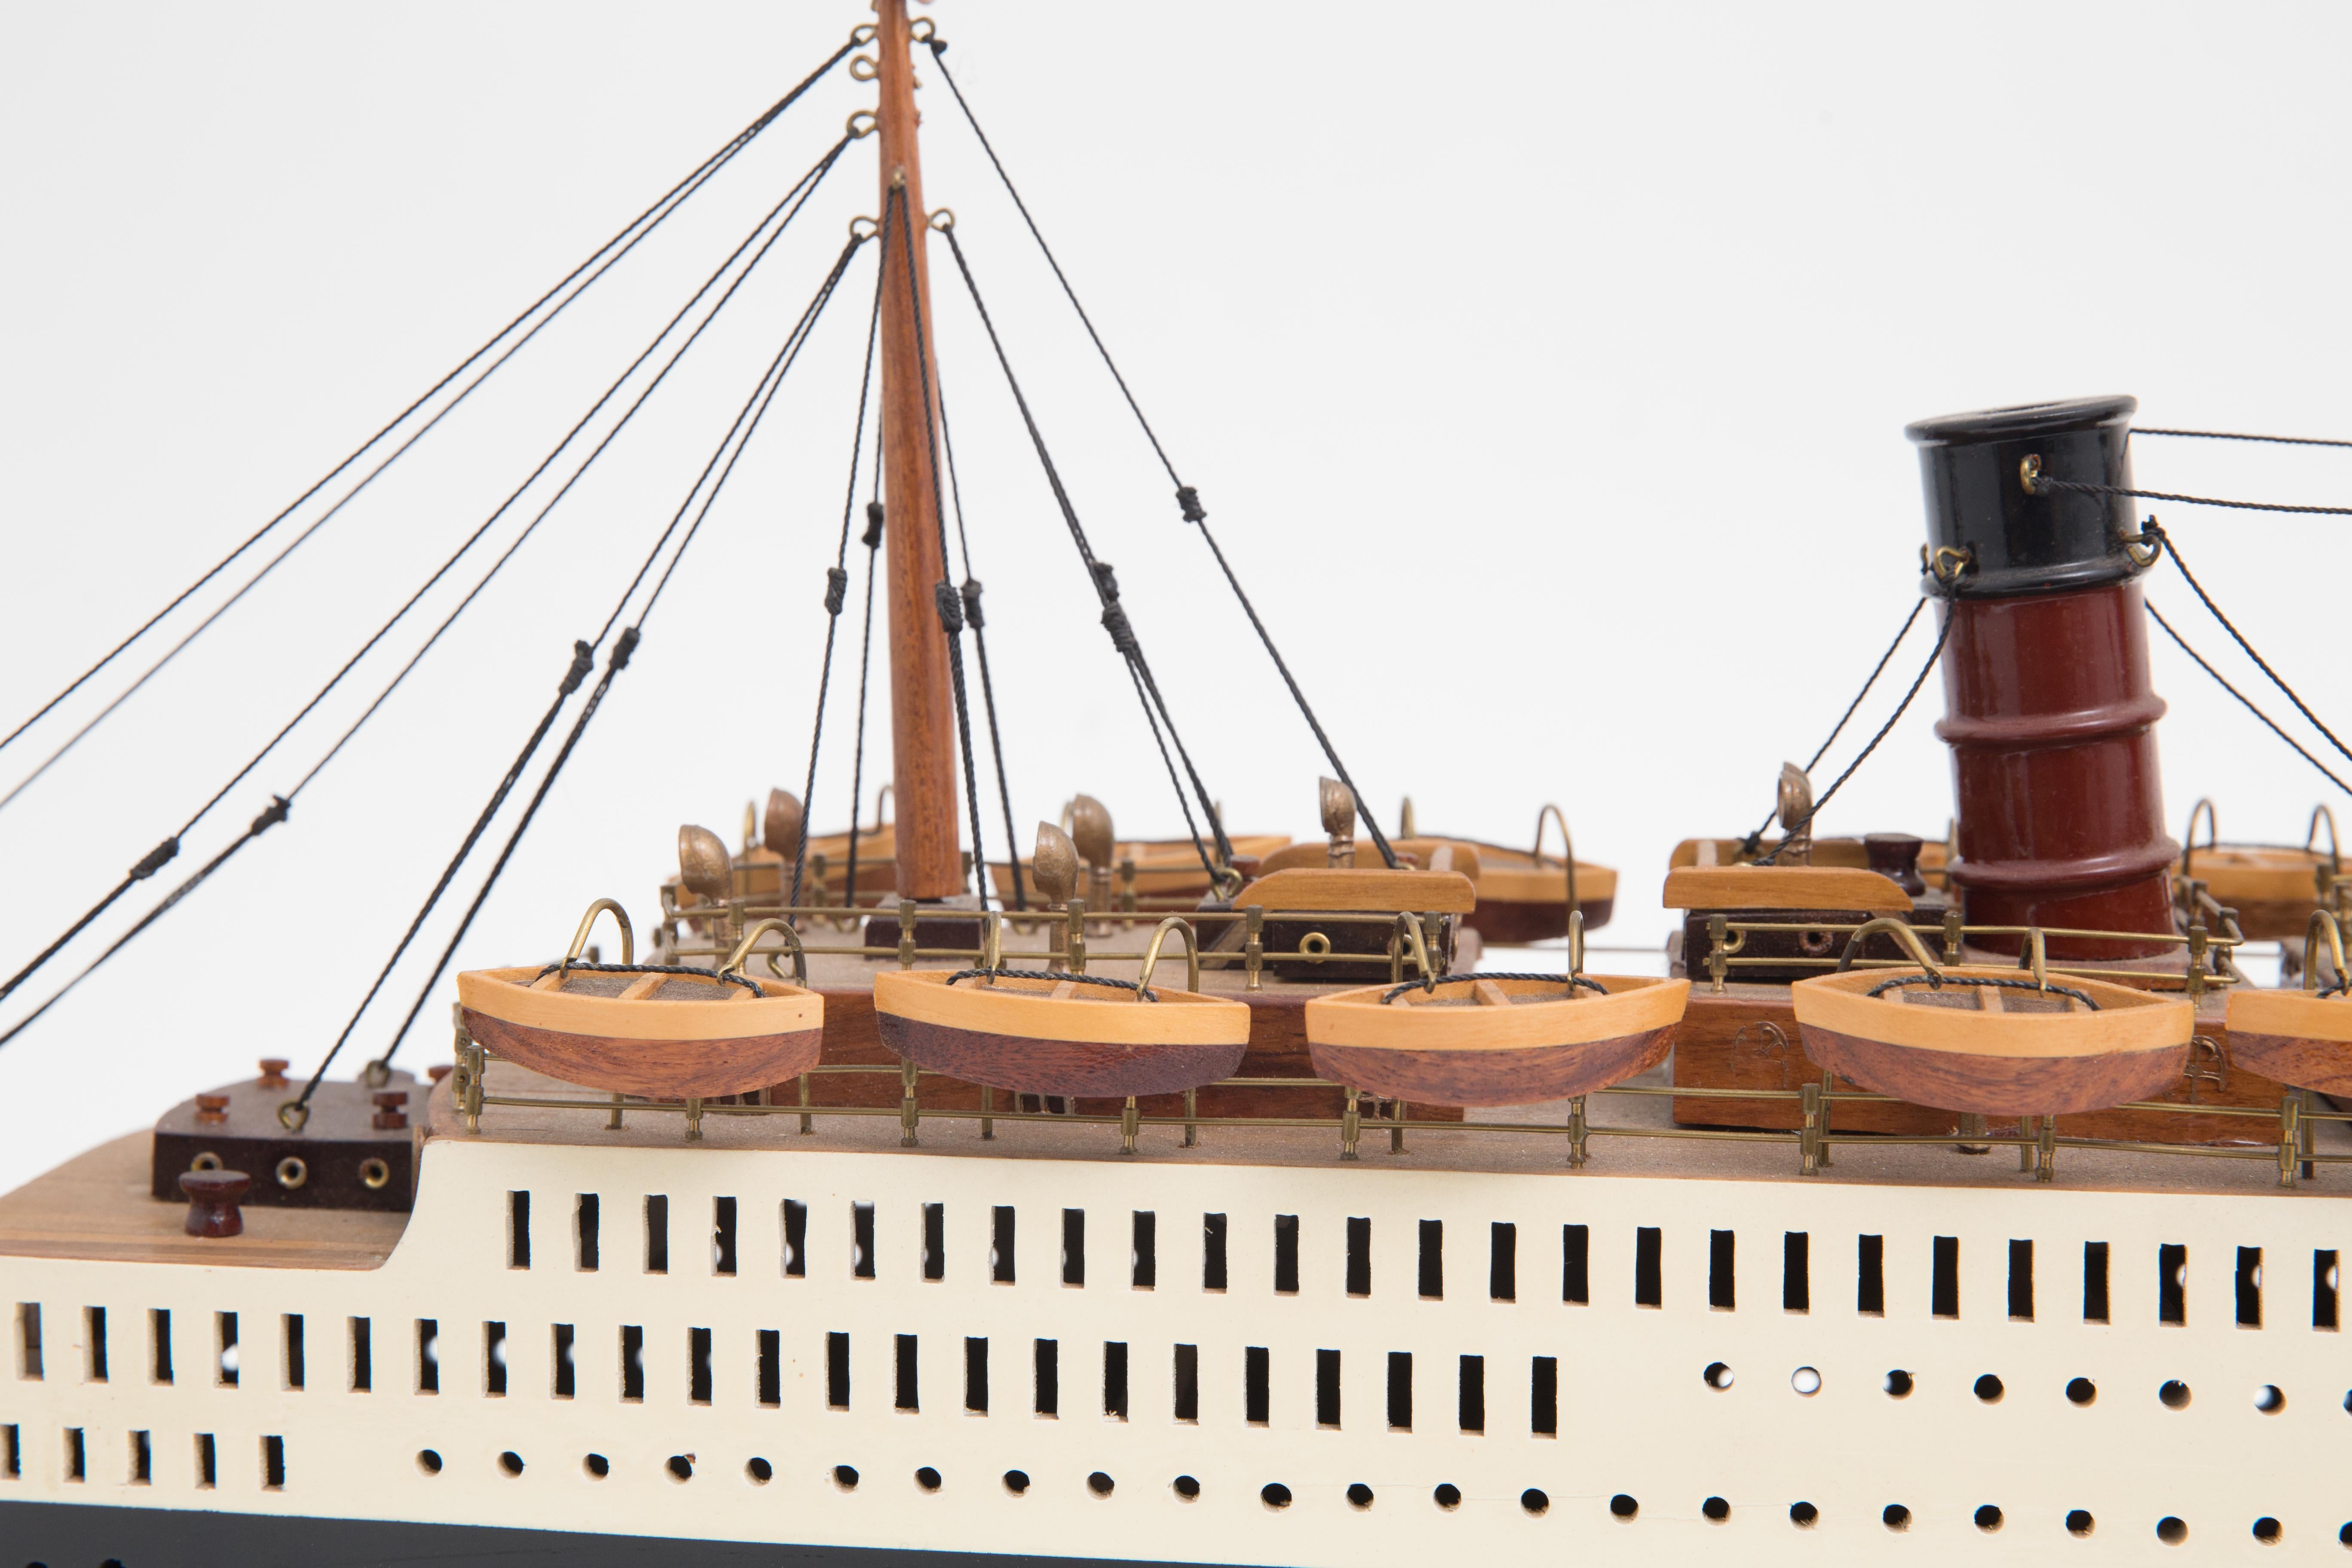 Model of the Cunard luxury Liner, Queen Mary 1